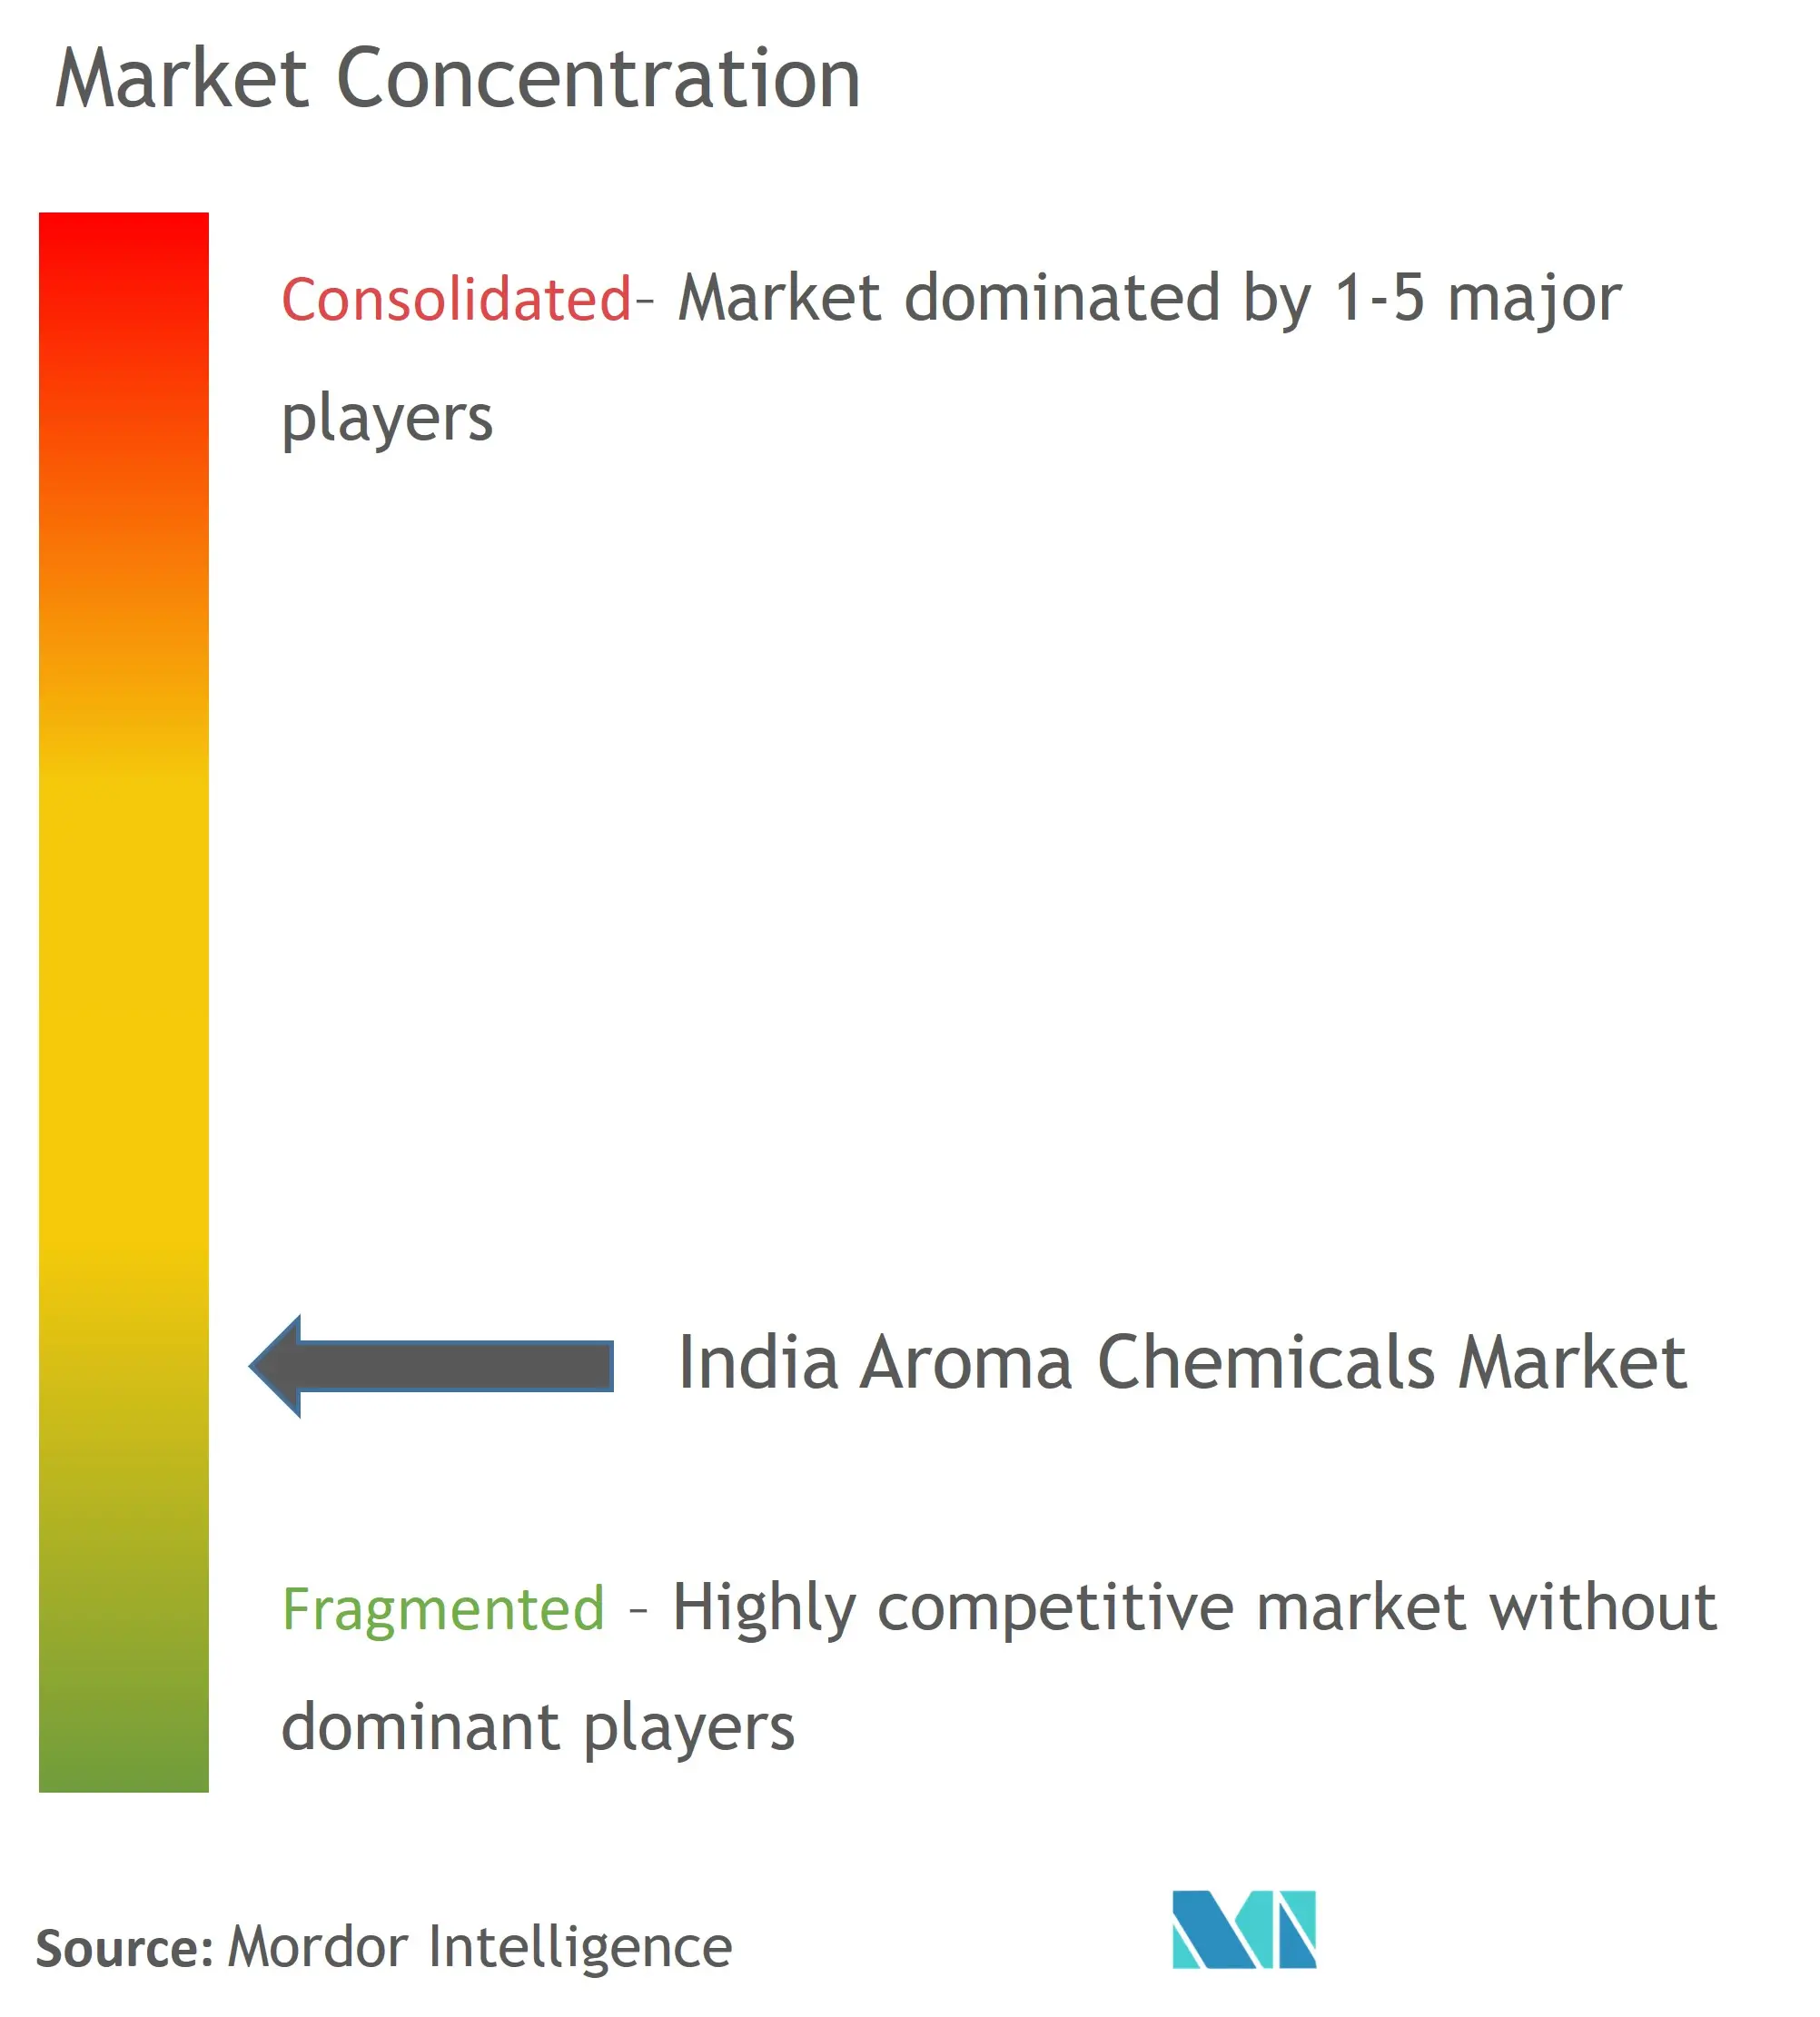 India Aroma Chemicals Market Concentration